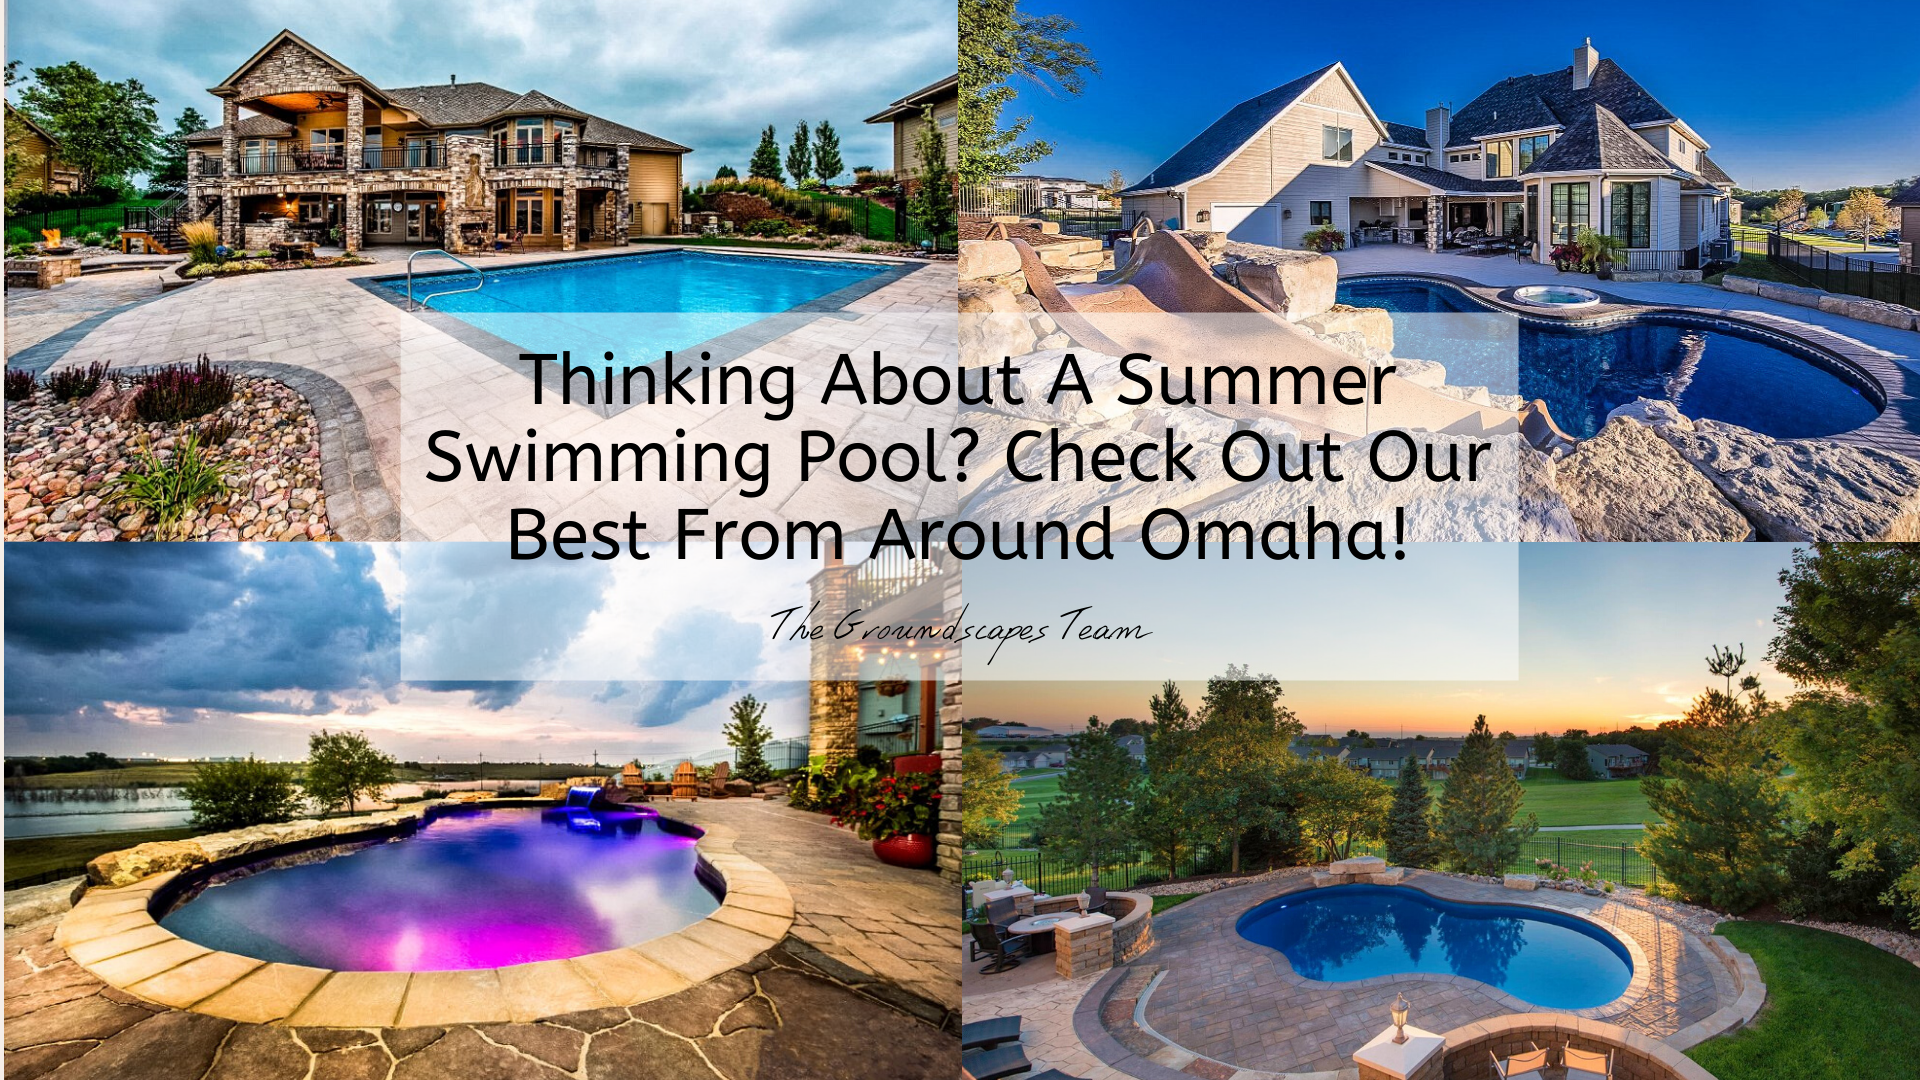 Thinking About A Summer Swimming Pool? Check Out Our Best From Around Omaha!